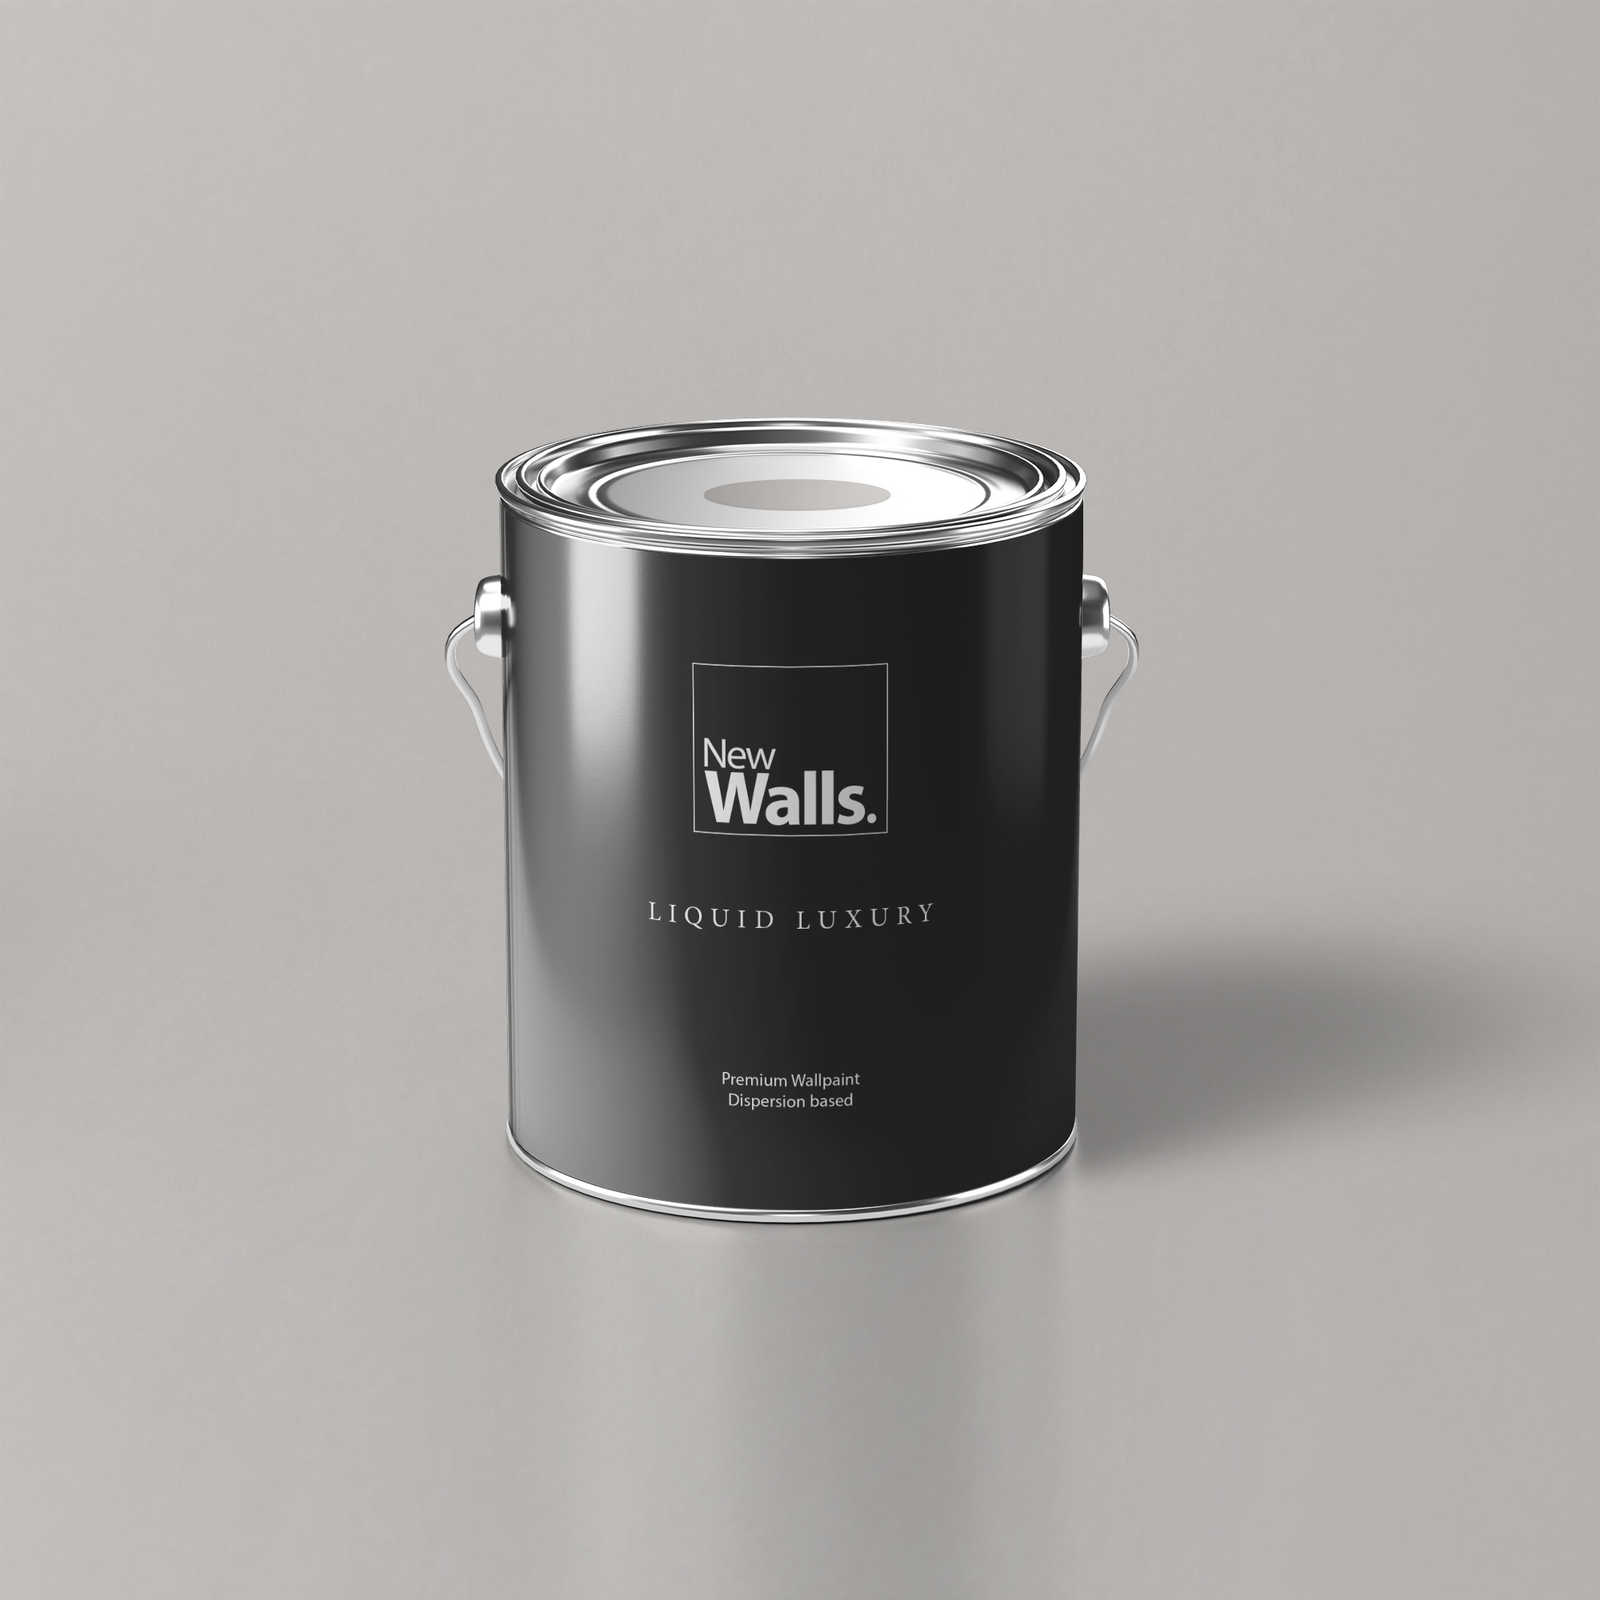 Premium Wall Paint soothing light grey »Creamy Grey« NW110 – 5 litre
